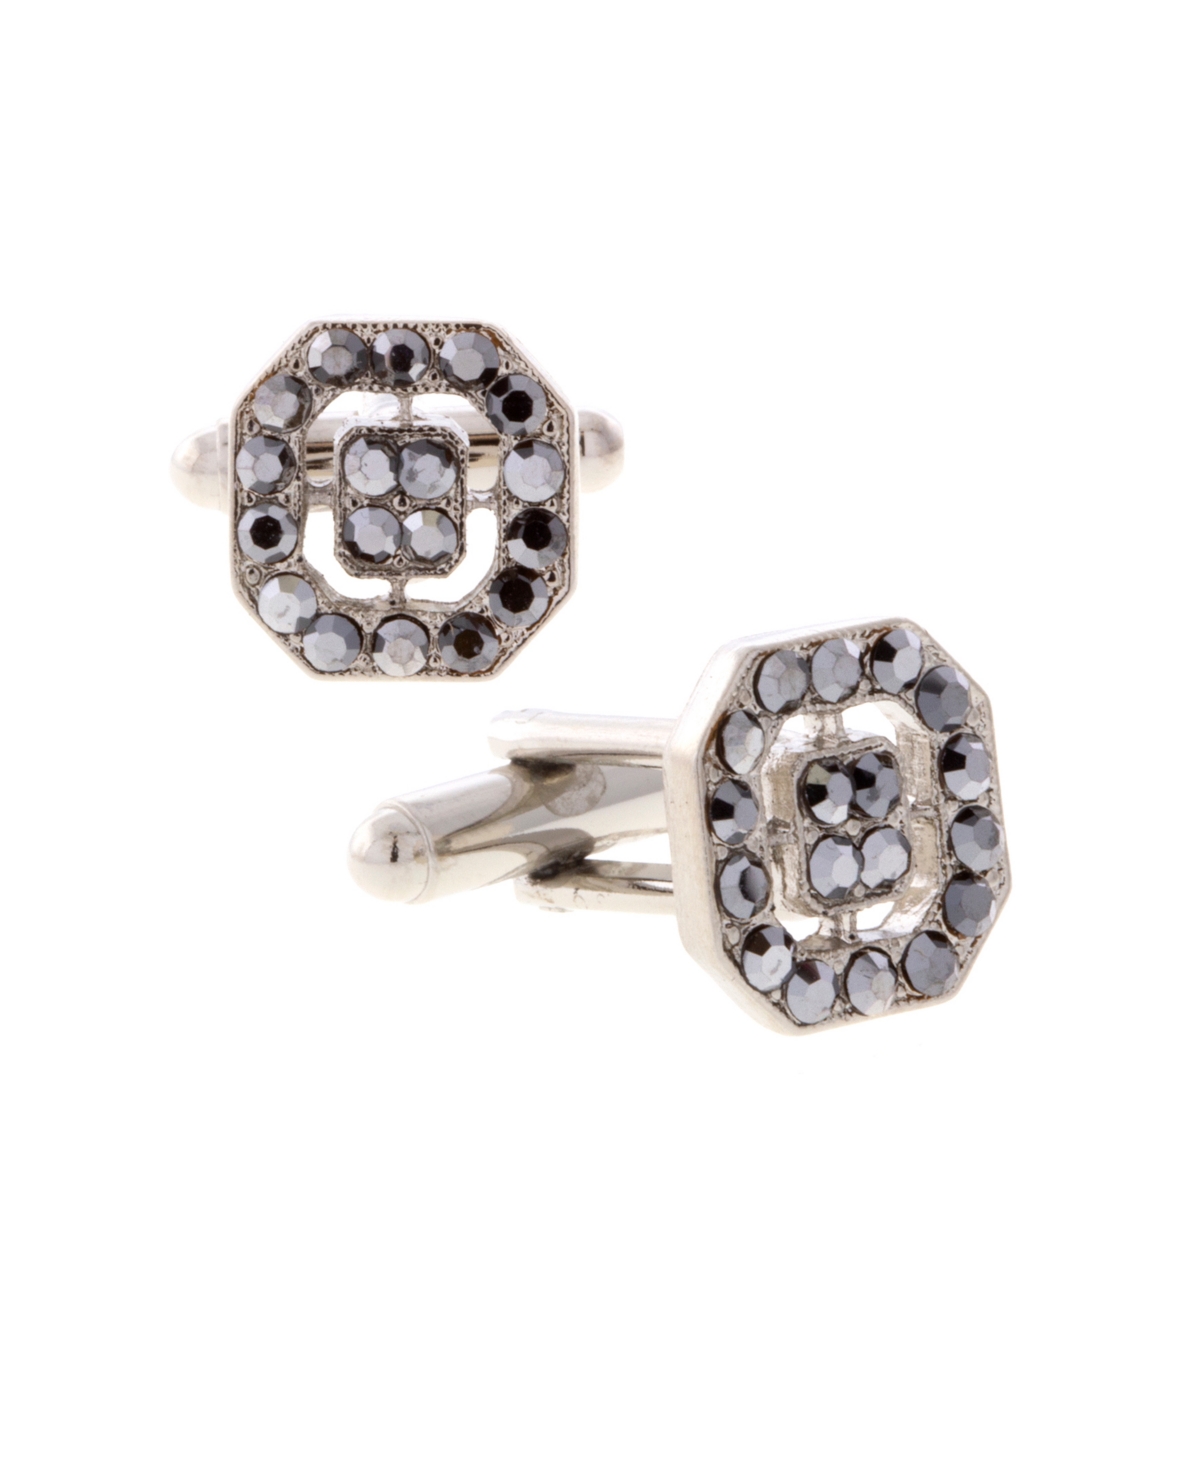 1928 Jewelry Silver-tone Crystal Octagon Cufflinks In Charcoal